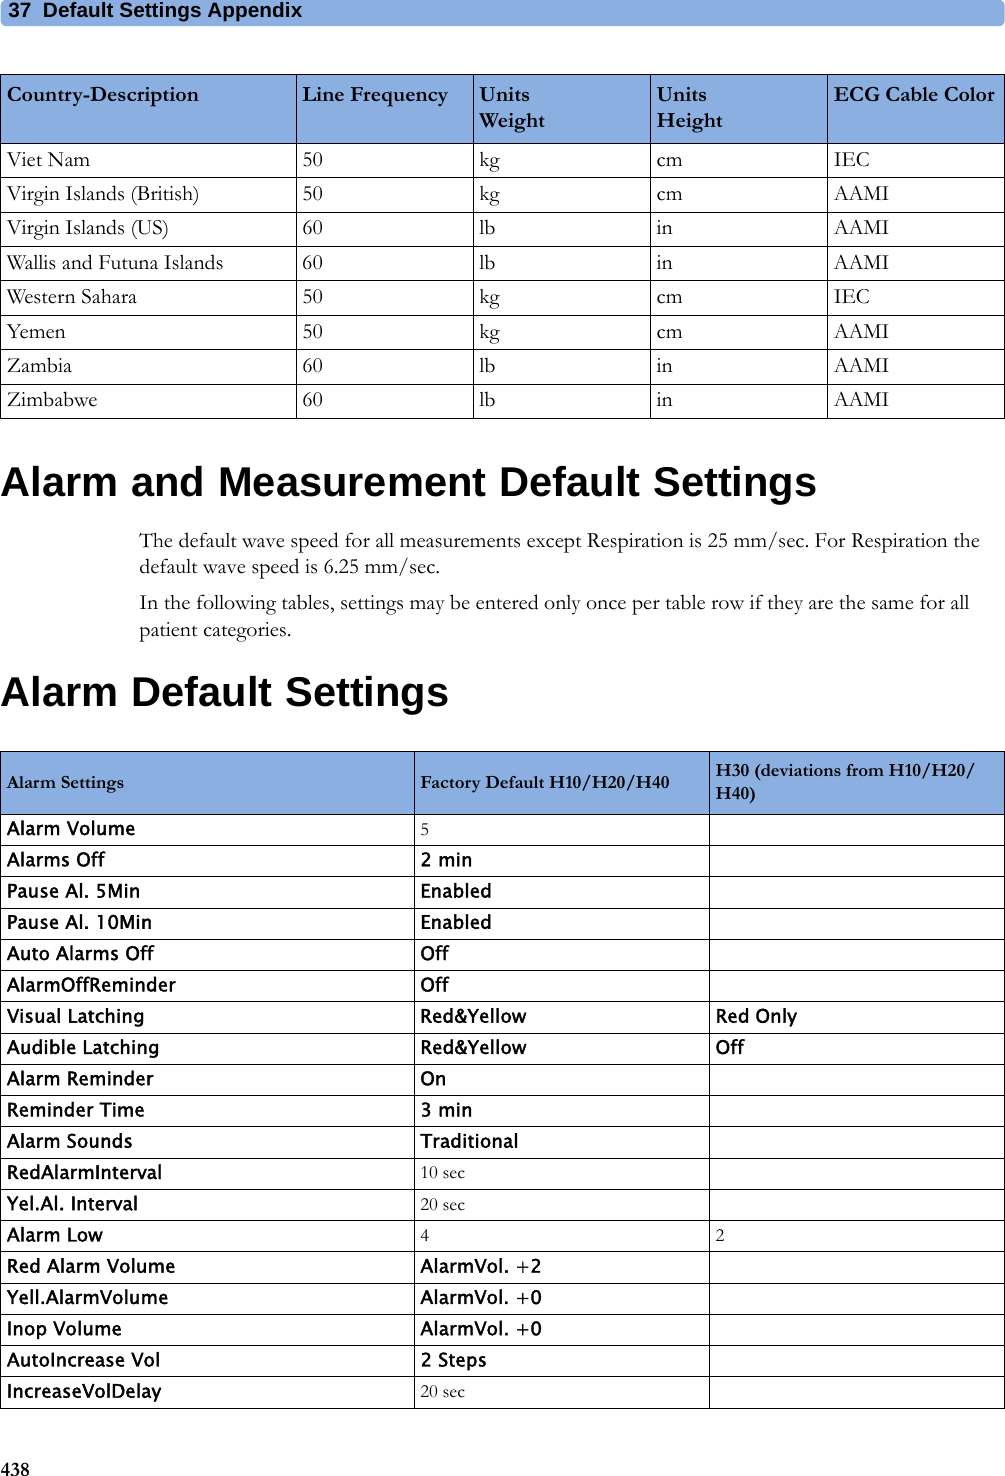 37 Default Settings Appendix438Alarm and Measurement Default SettingsThe default wave speed for all measurements except Respiration is 25 mm/sec. For Respiration the default wave speed is 6.25 mm/sec.In the following tables, settings may be entered only once per table row if they are the same for all patient categories.Alarm Default SettingsViet Nam 50 kg cm IECVirgin Islands (British) 50 kg cm AAMIVirgin Islands (US) 60 lb in AAMIWallis and Futuna Islands 60 lb in AAMIWestern Sahara 50 kg cm IECYemen 50 kg cm AAMIZambia 60 lb in AAMIZimbabwe 60 lb in AAMICountry-Description Line Frequency UnitsWeightUnitsHeightECG Cable ColorAlarm Settings Factory Default H10/H20/H40 H30 (deviations from H10/H20/H40)Alarm Volume 5Alarms Off 2 minPause Al. 5Min EnabledPause Al. 10Min EnabledAuto Alarms Off OffAlarmOffReminder OffVisual Latching Red&amp;Yellow Red OnlyAudible Latching Red&amp;Yellow OffAlarm Reminder OnReminder Time 3 minAlarm Sounds TraditionalRedAlarmInterval 10 secYel.Al. Interval 20 secAlarm Low 42Red Alarm Volume AlarmVol. +2Yell.AlarmVolume AlarmVol. +0Inop Volume AlarmVol. +0AutoIncrease Vol 2 StepsIncreaseVolDelay 20 sec